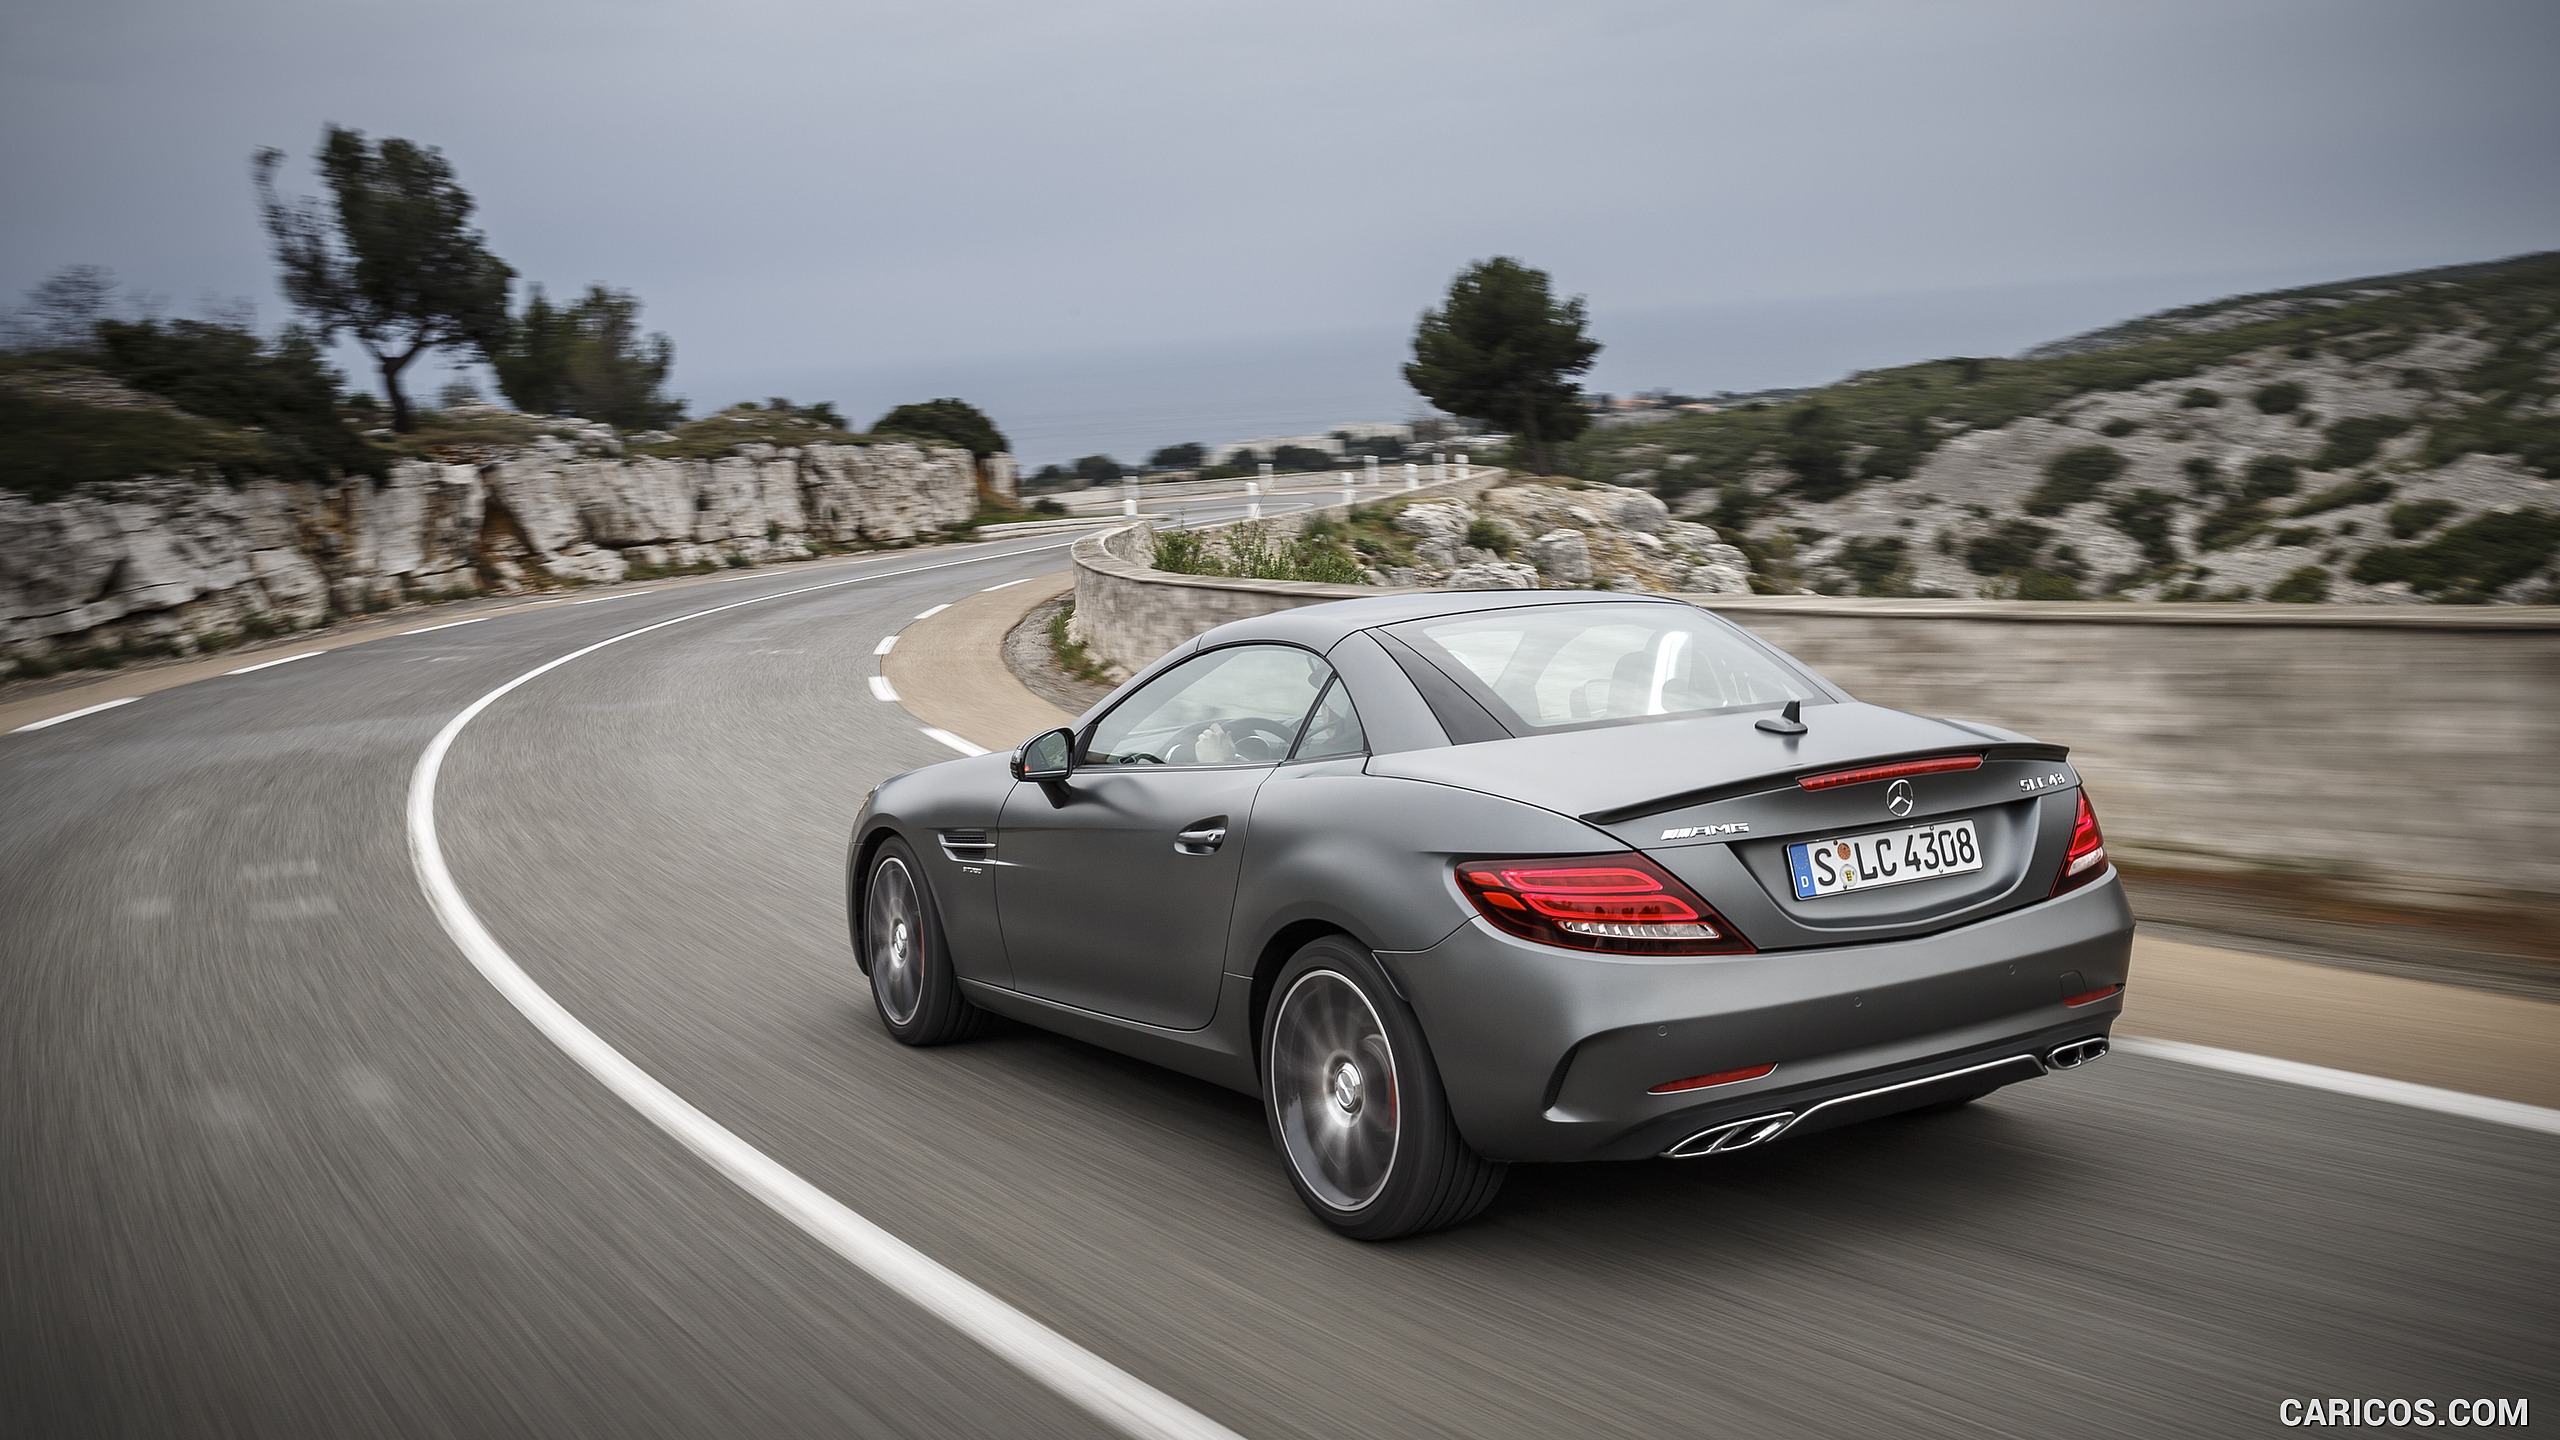 2017 Mercedes-AMG SLC 43 - Top Closed - Rear, #50 of 92